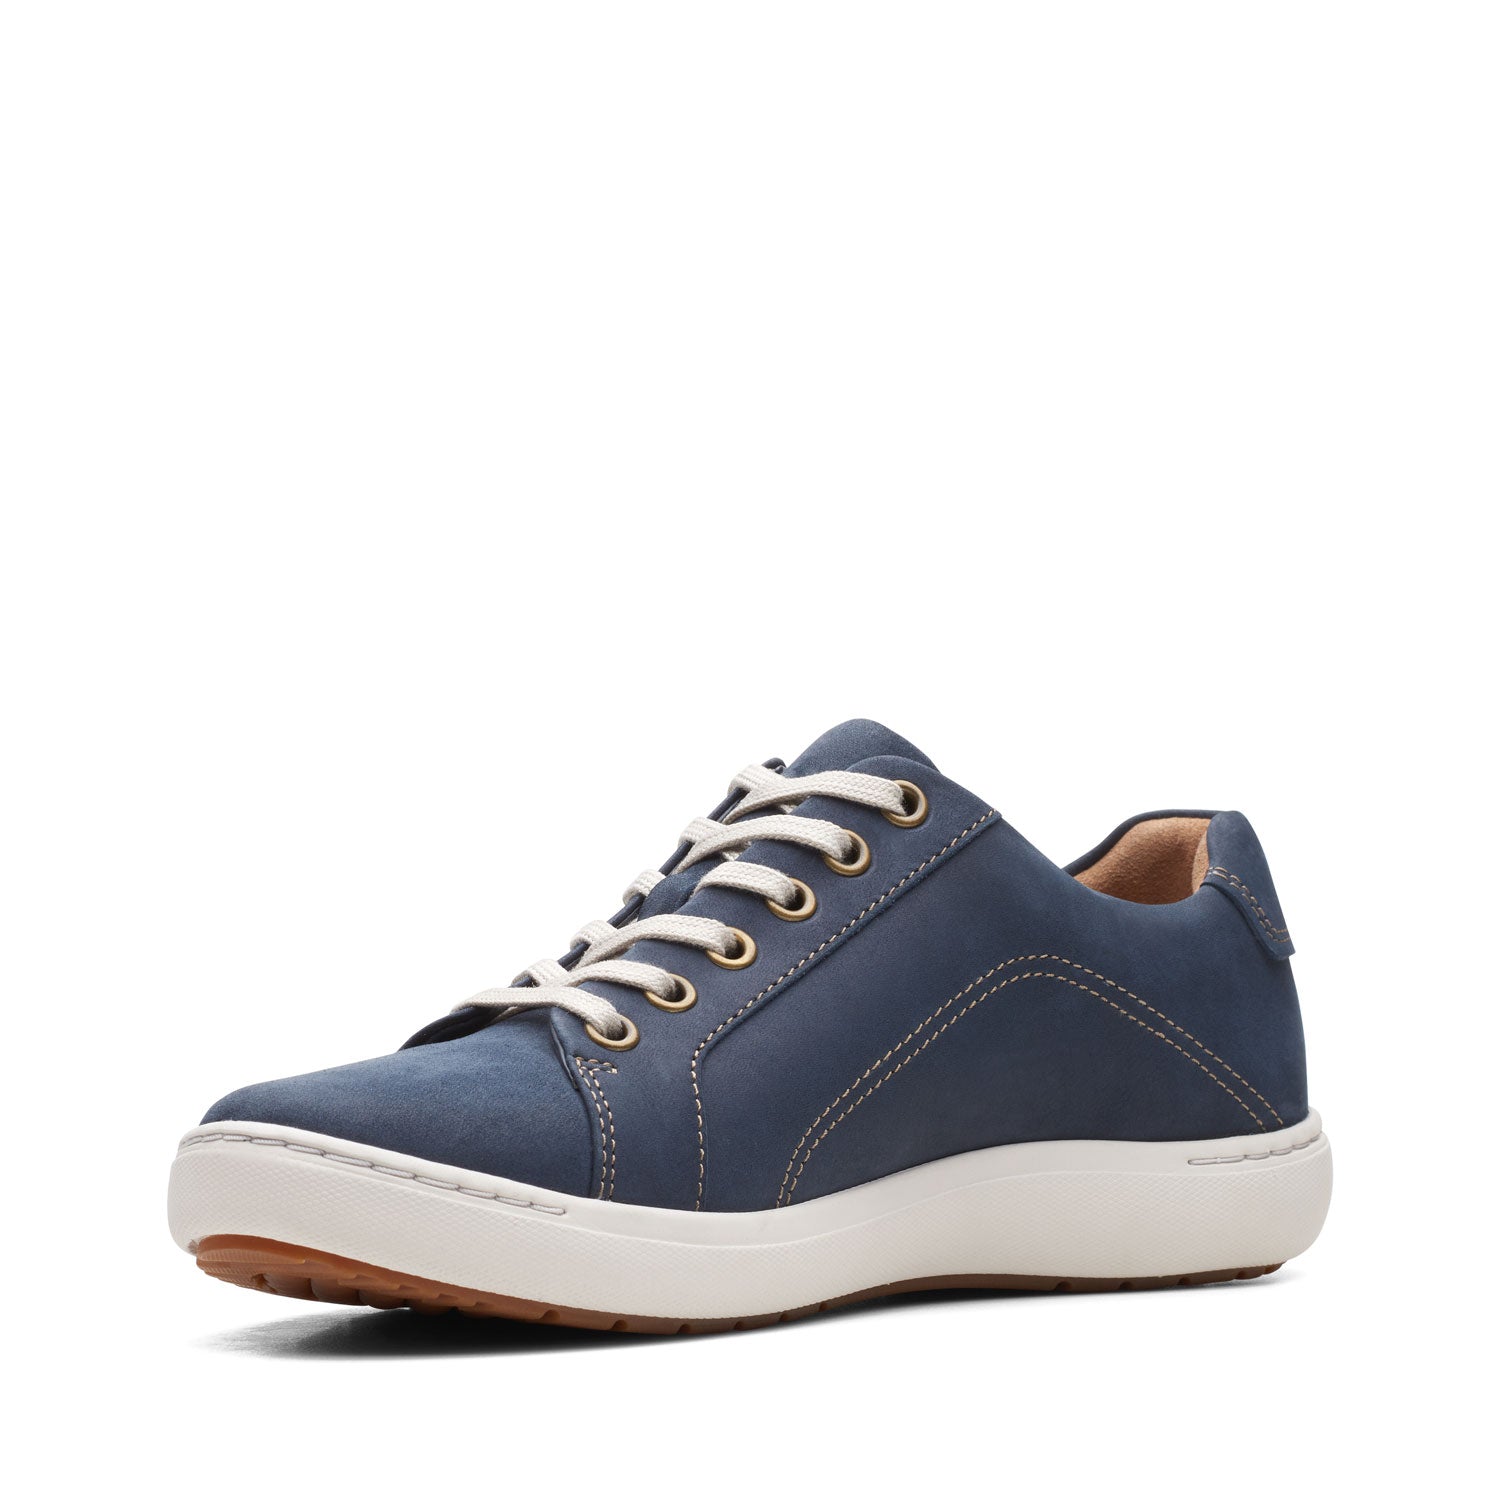 Clarks Nalle Lace Trainers - Navy 1 Shaws Department Stores